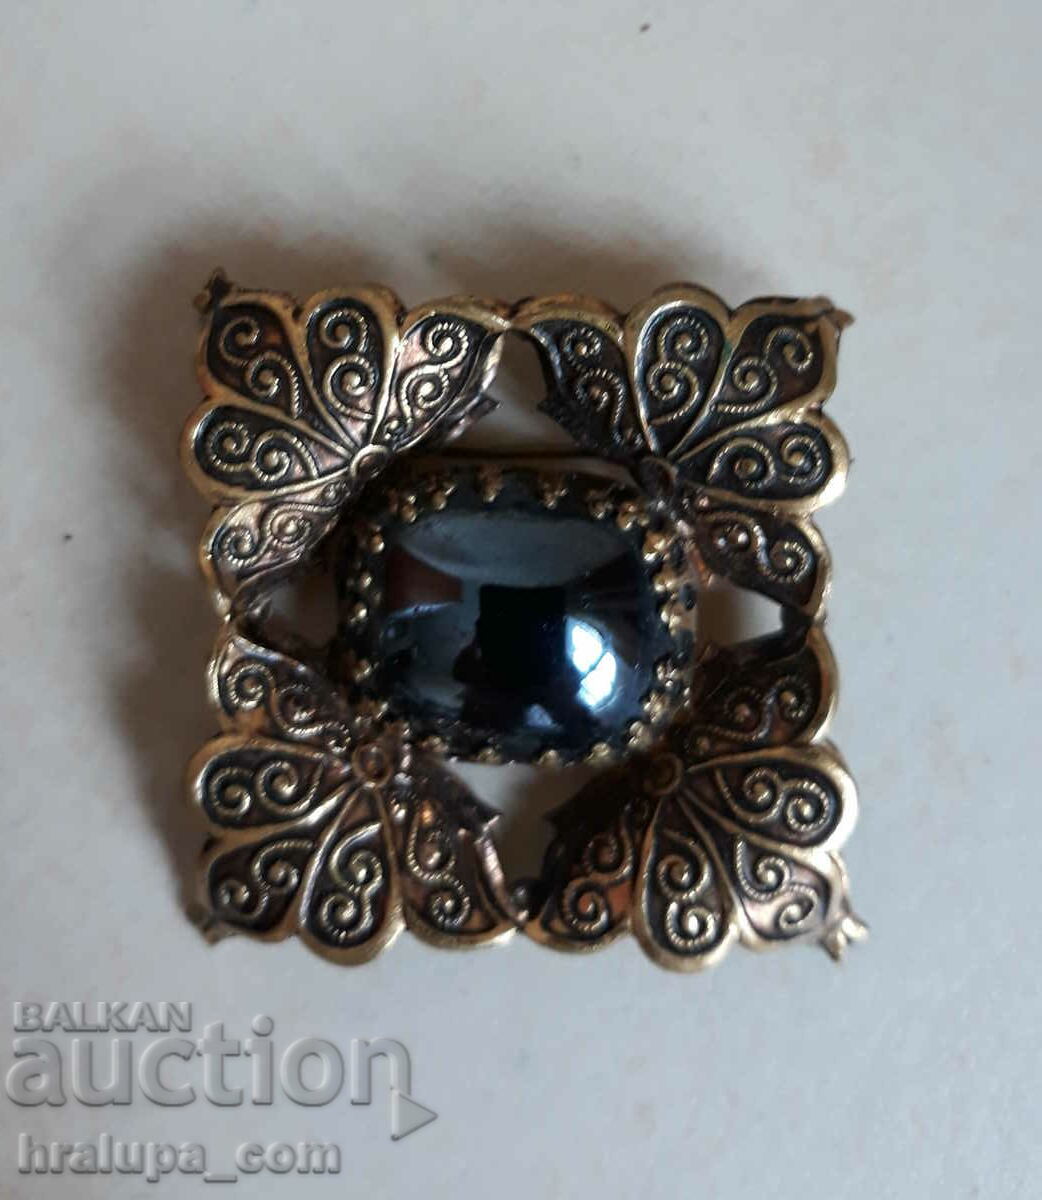 Old large stone brooch